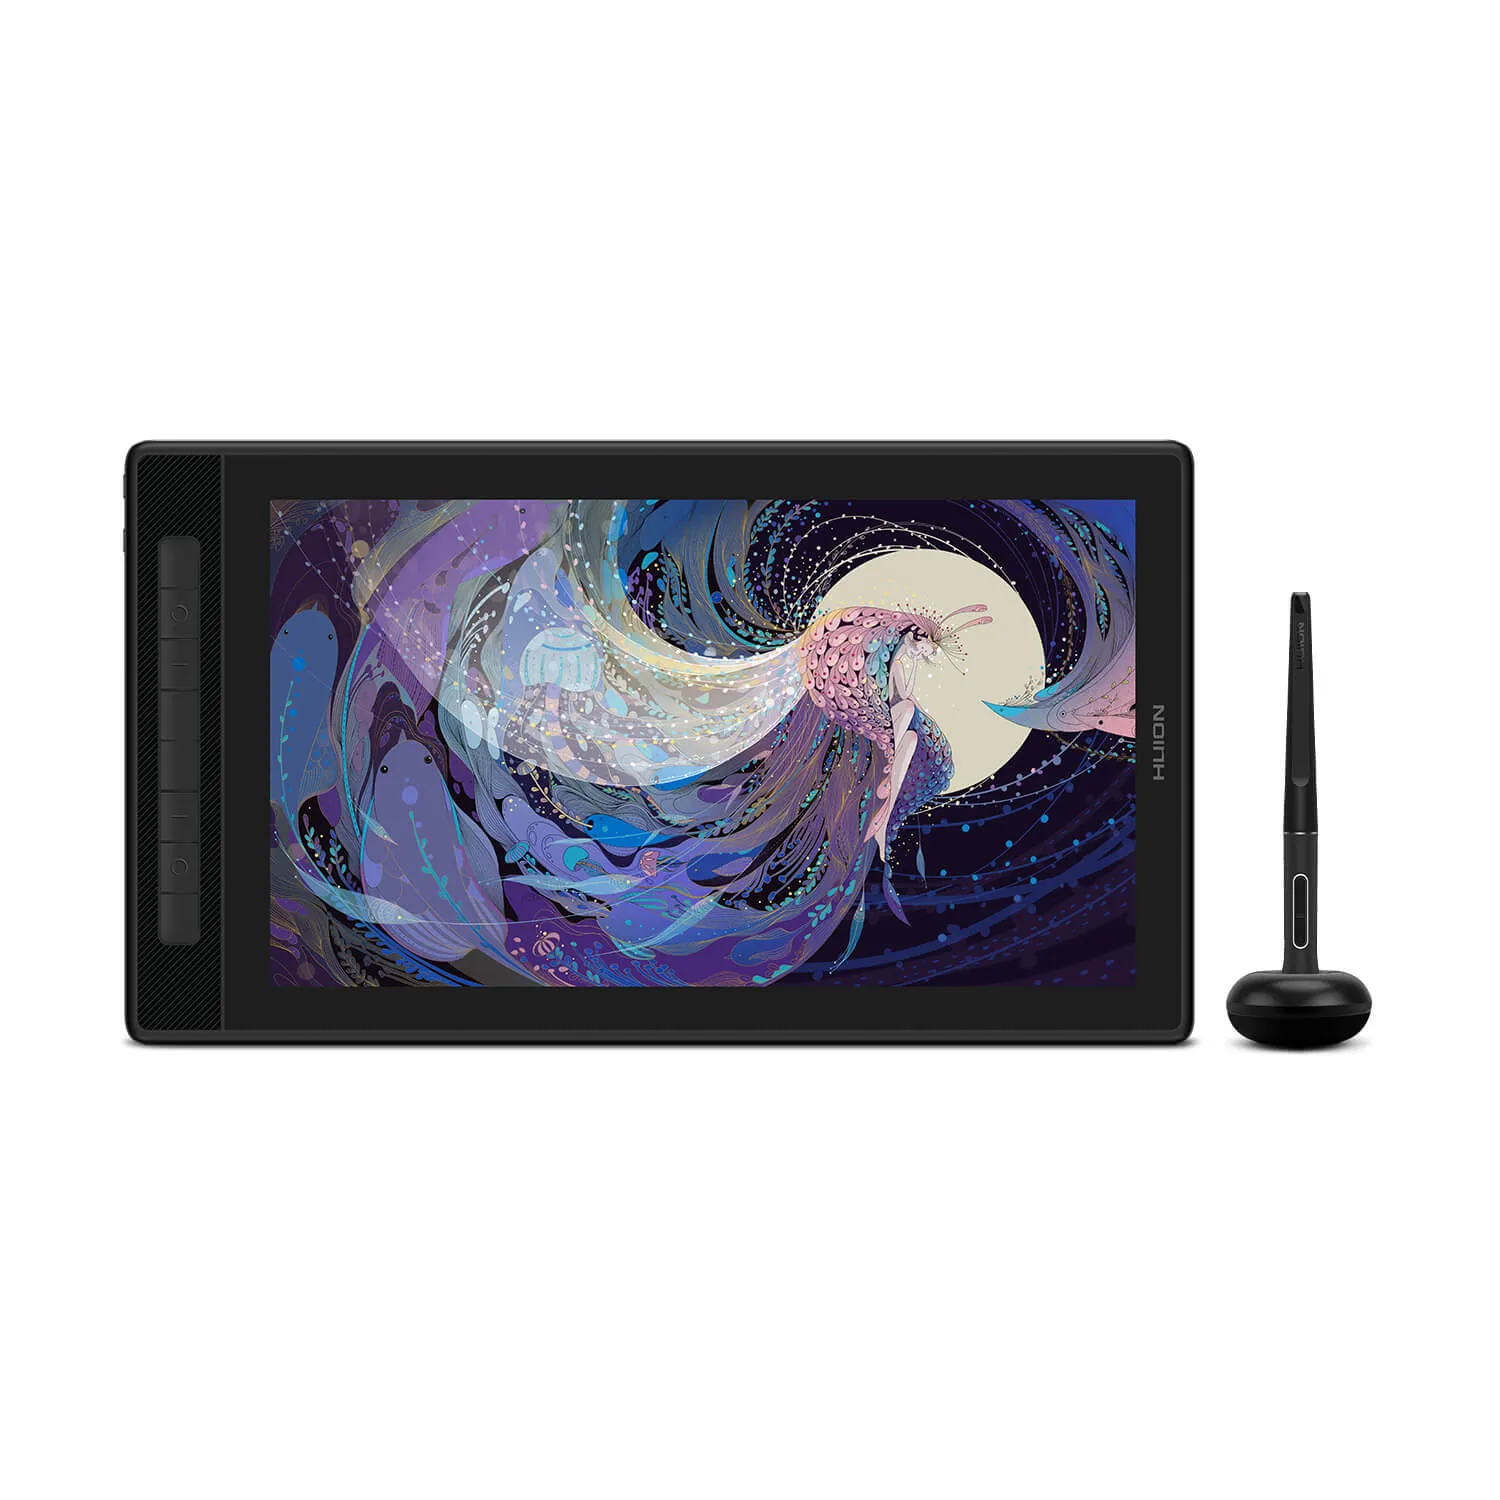 Refurbished Products | Huion Official Store: Drawing Tablets, Pen 